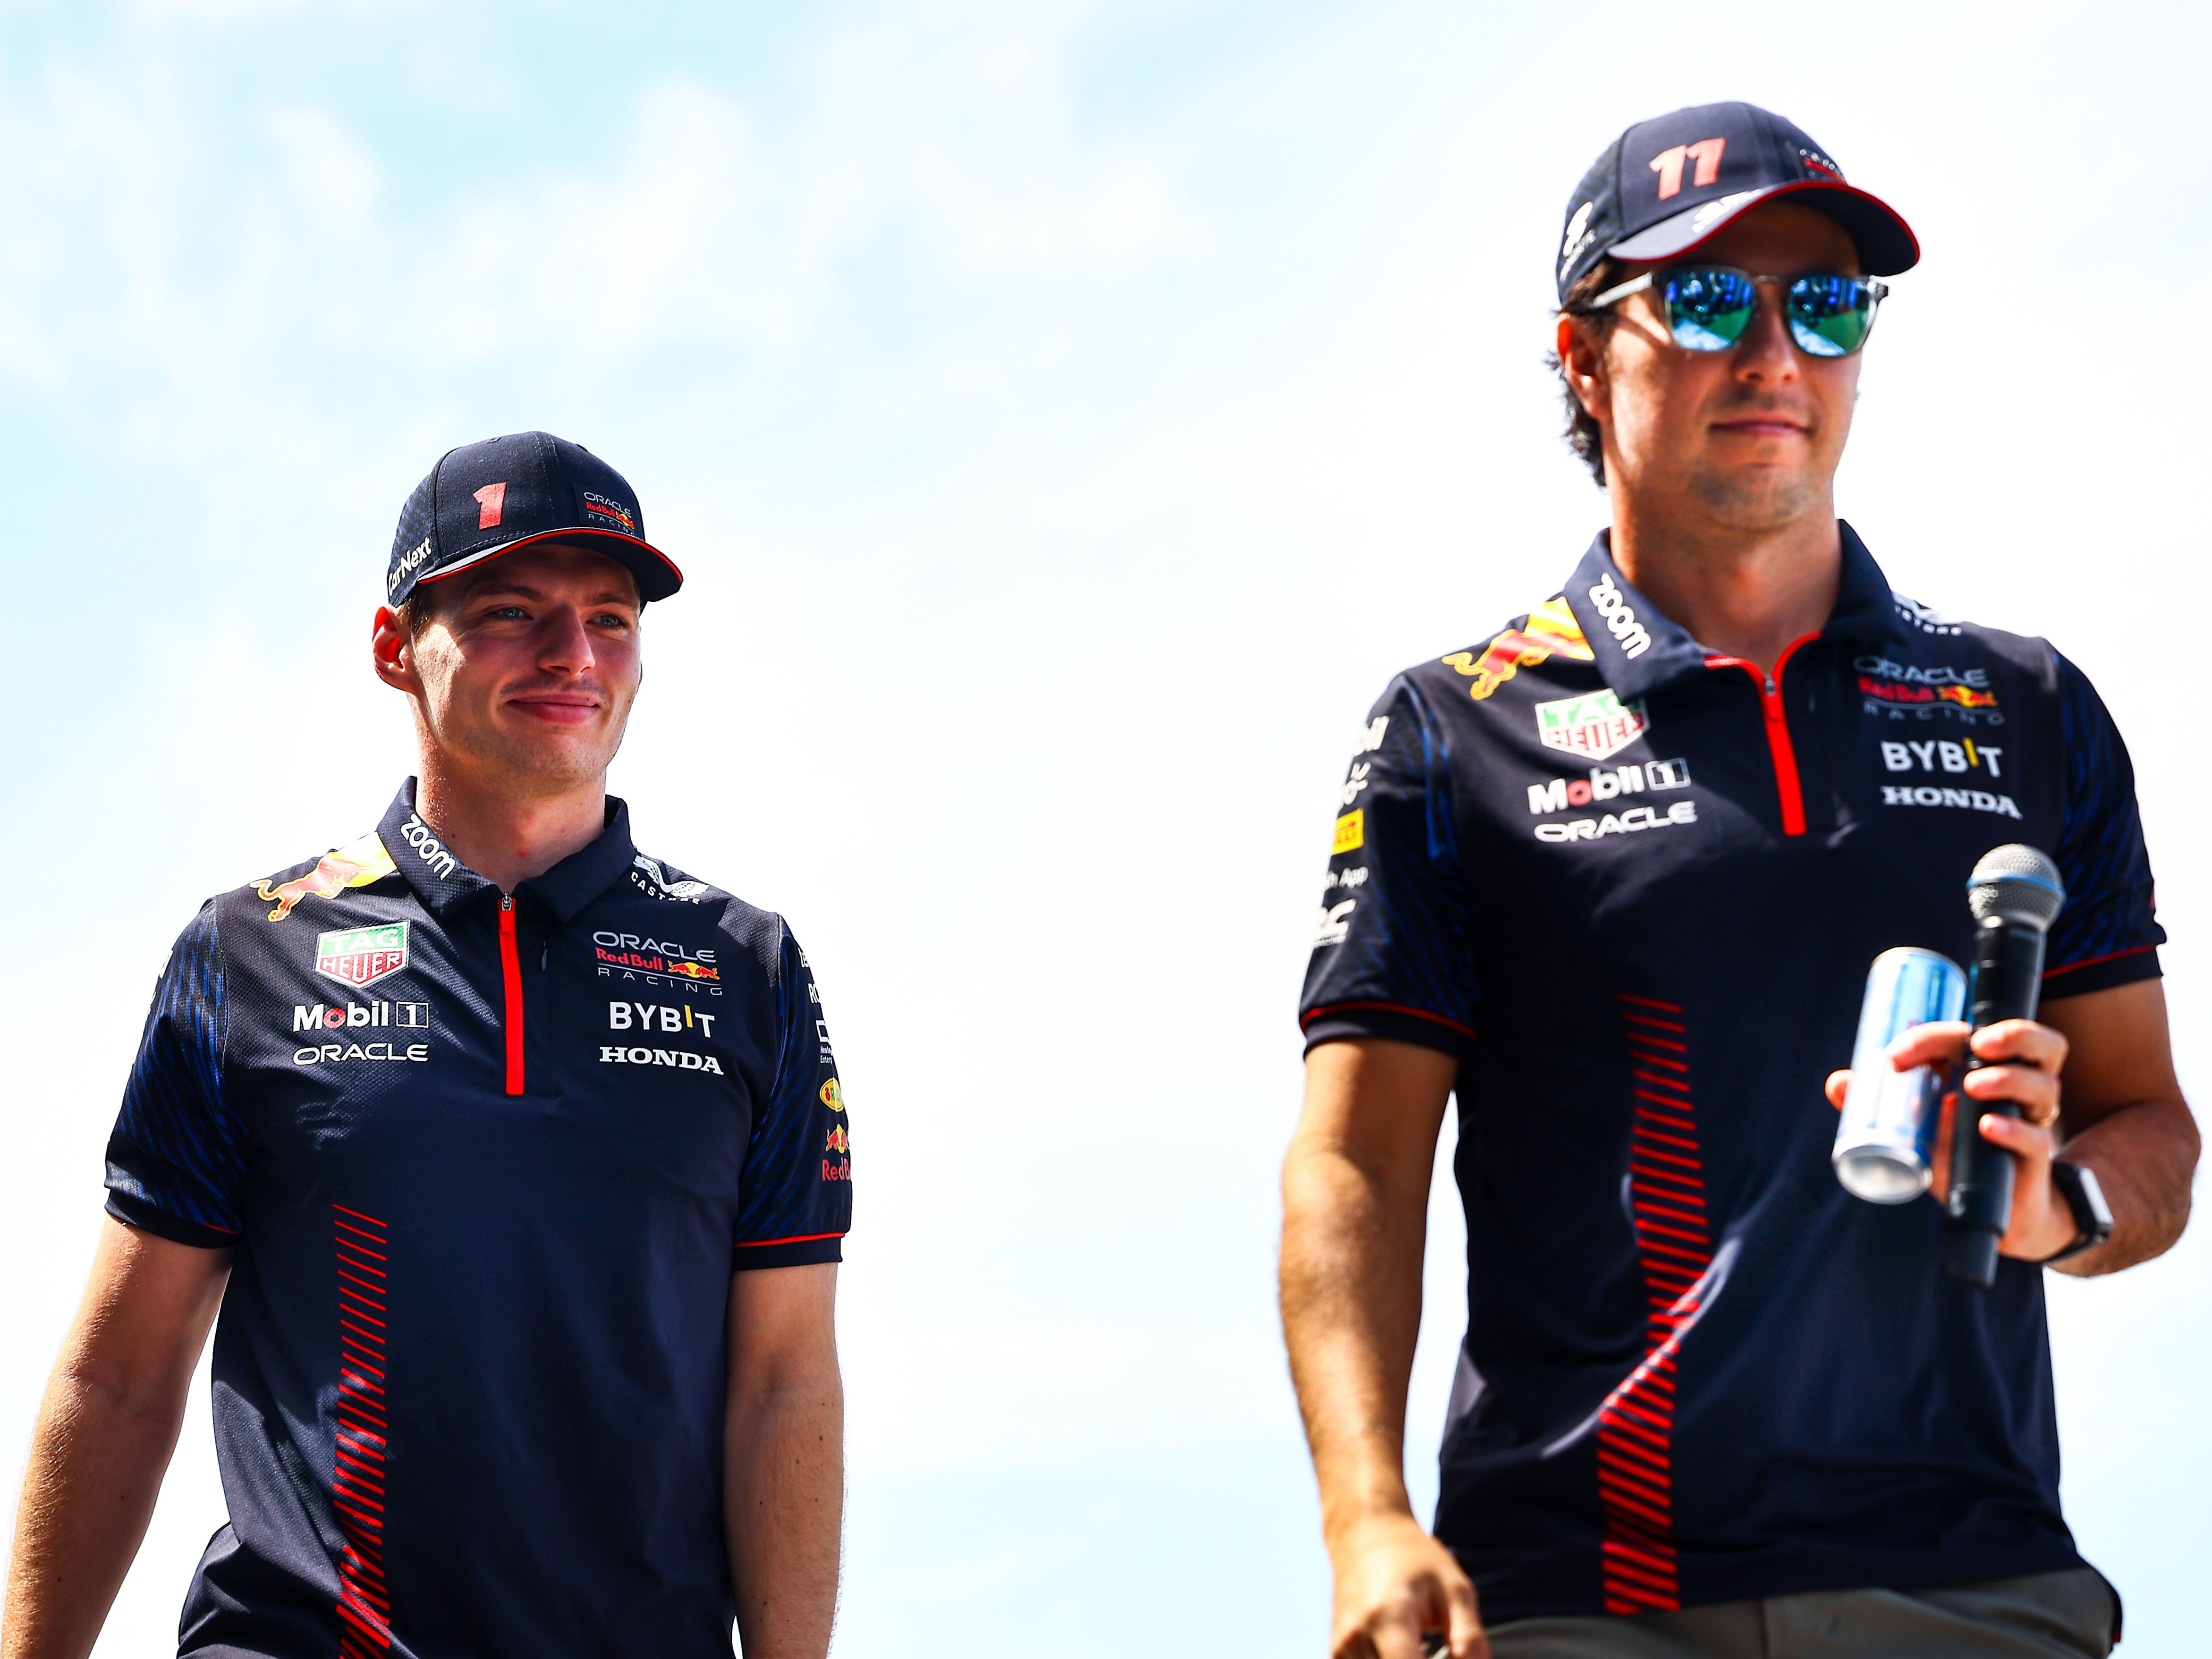 Max Verstappen and Sergio Perez look on from the fan stage prior to final practice ahead of the 2023 F1 Saudi Arabian Grand Prix (Photo by Mark Thompson/Getty Images)